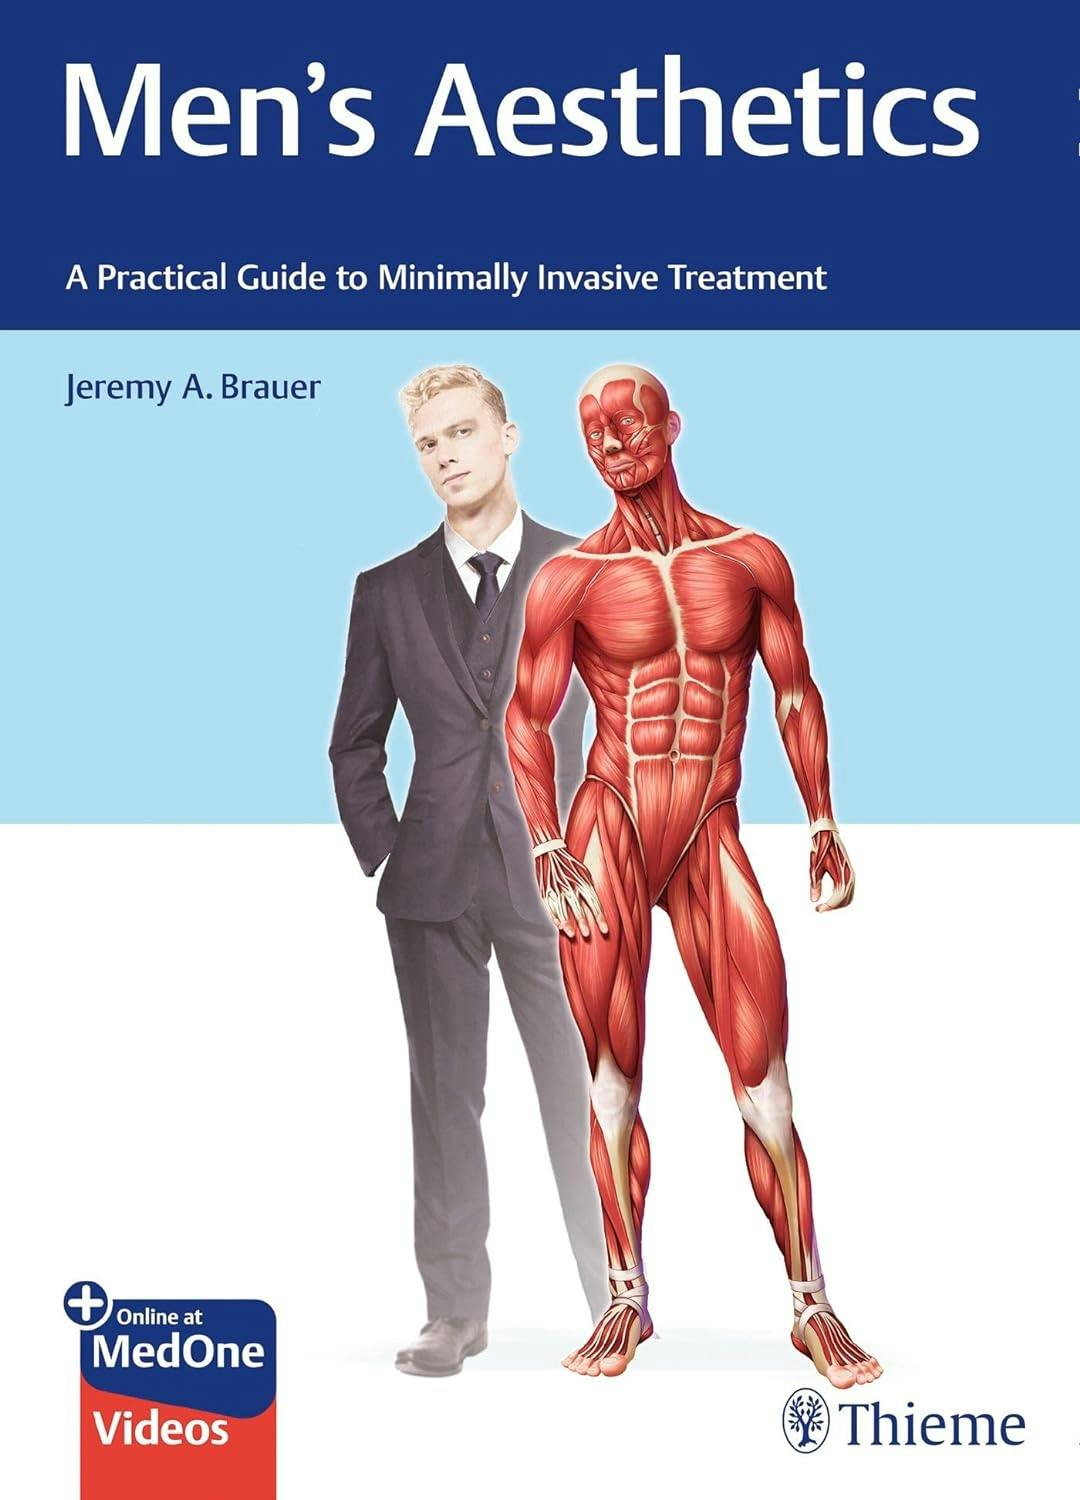 Men’s Aesthetics: A Practical Guide to Minimally Invasive Treatment